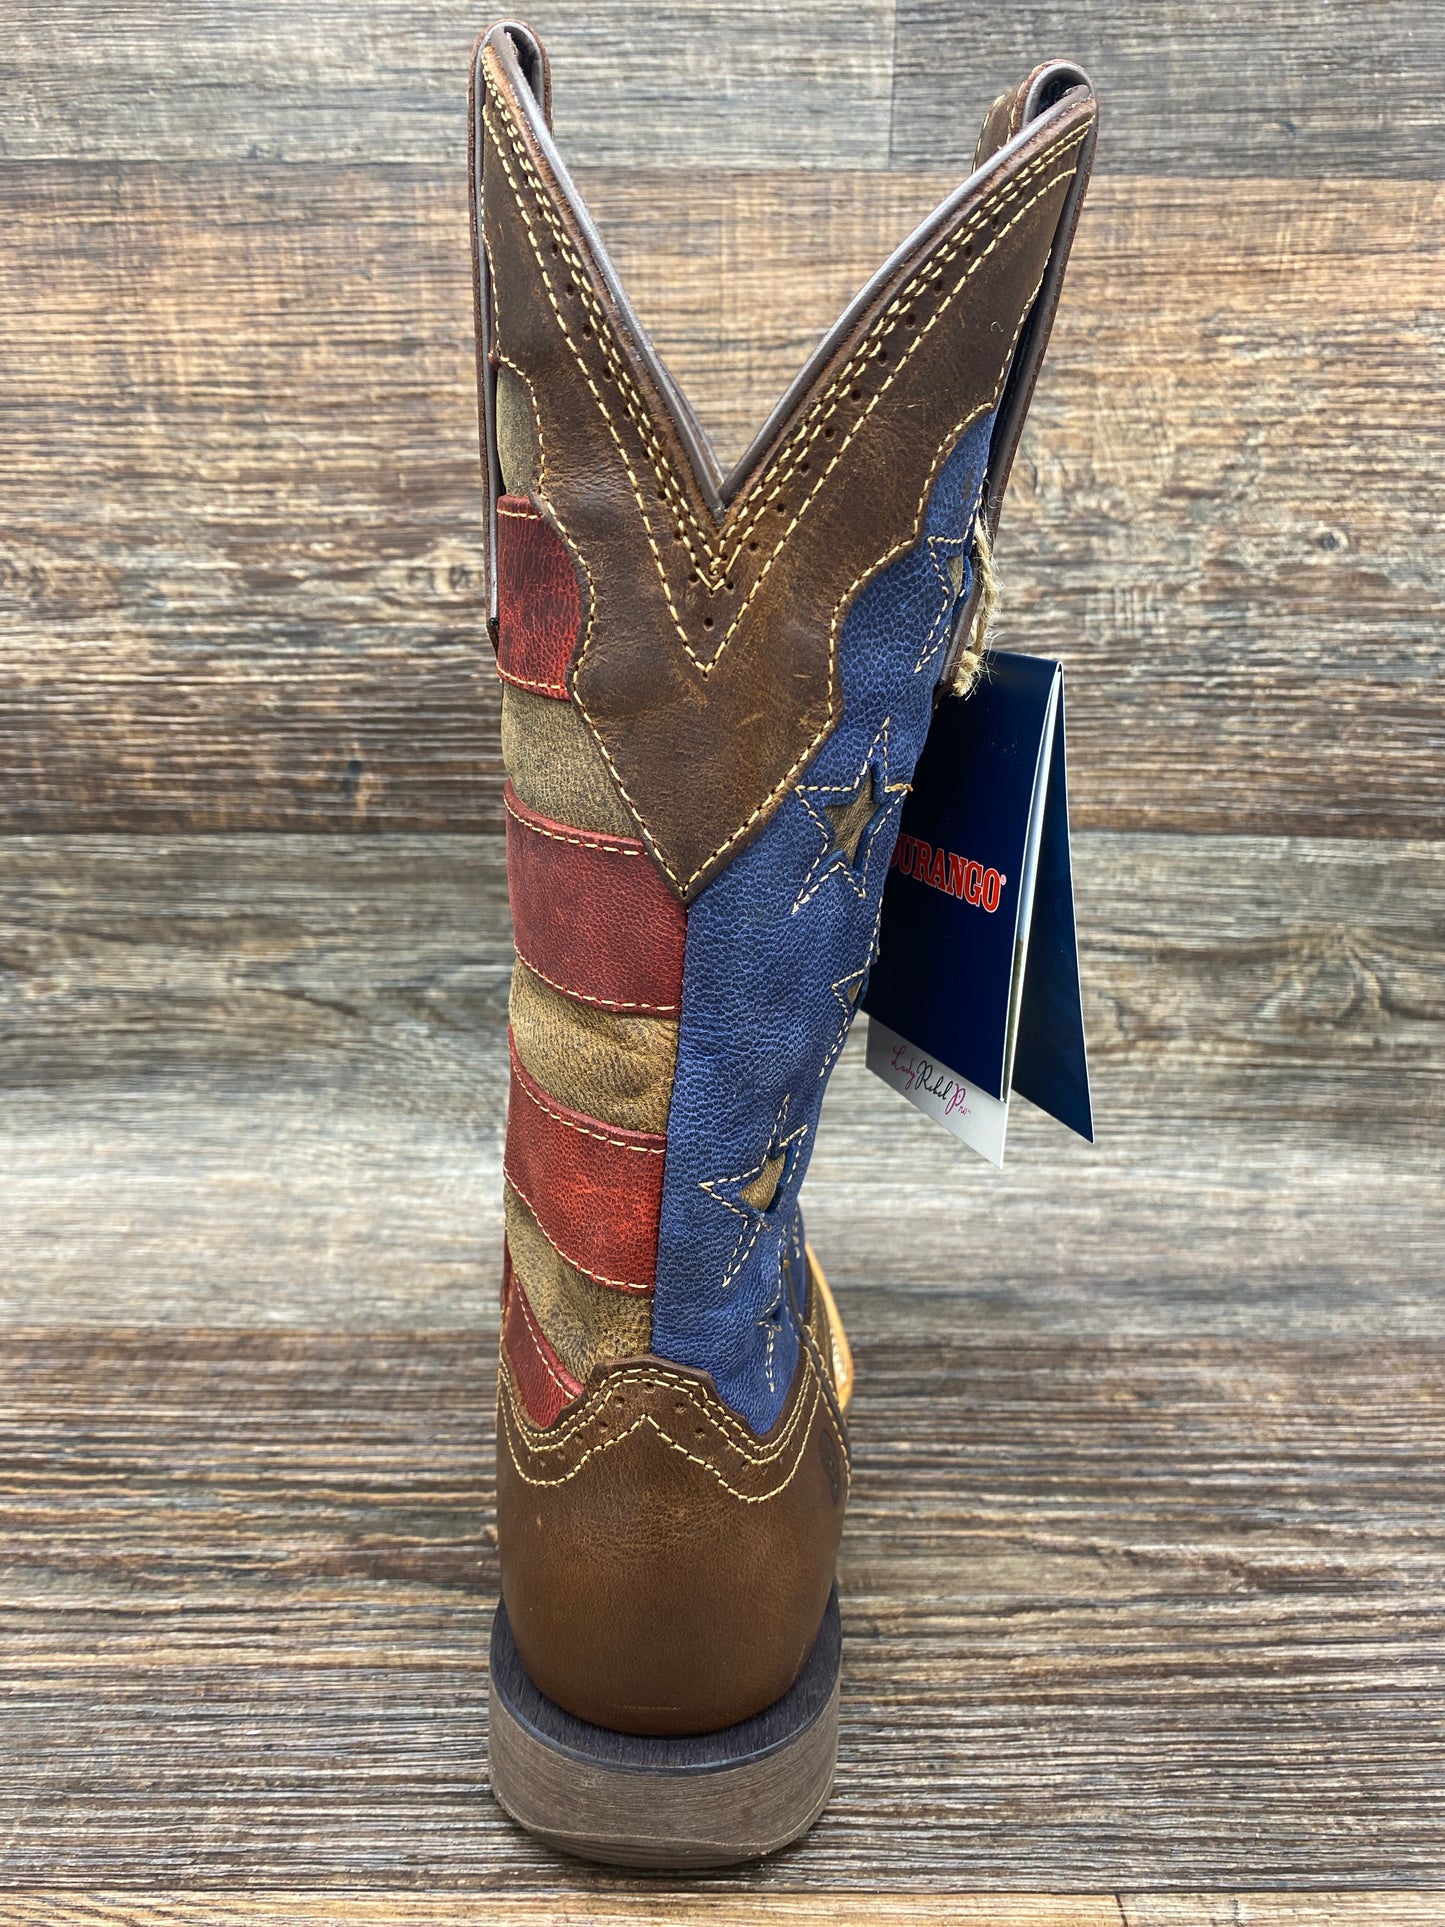 drd0393 Lady Rebel Pro Vintage Flag boot by Durango